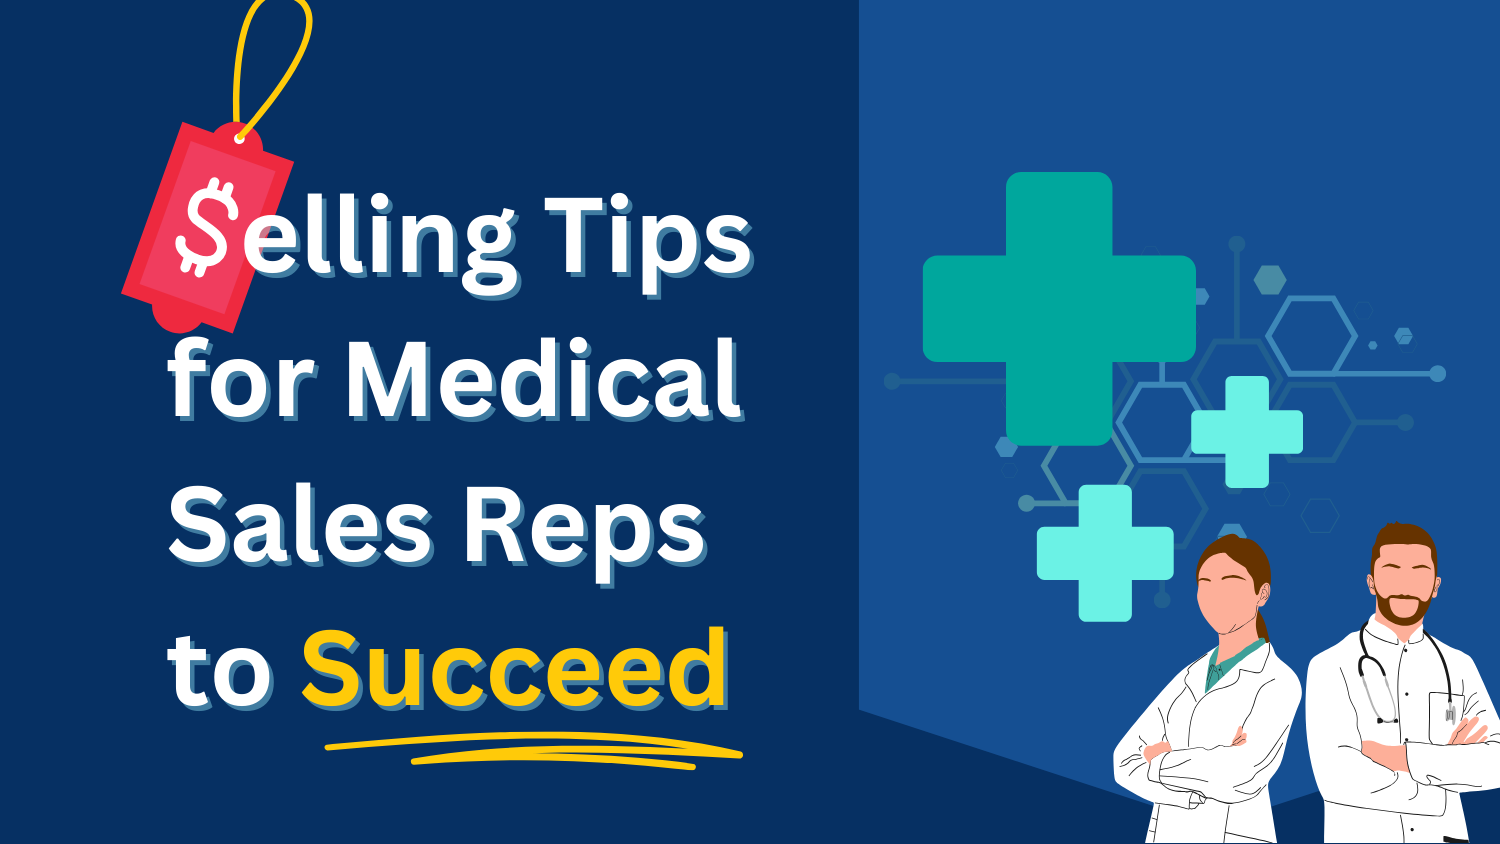 Selling Tips for Medical Sales Reps to Succeed